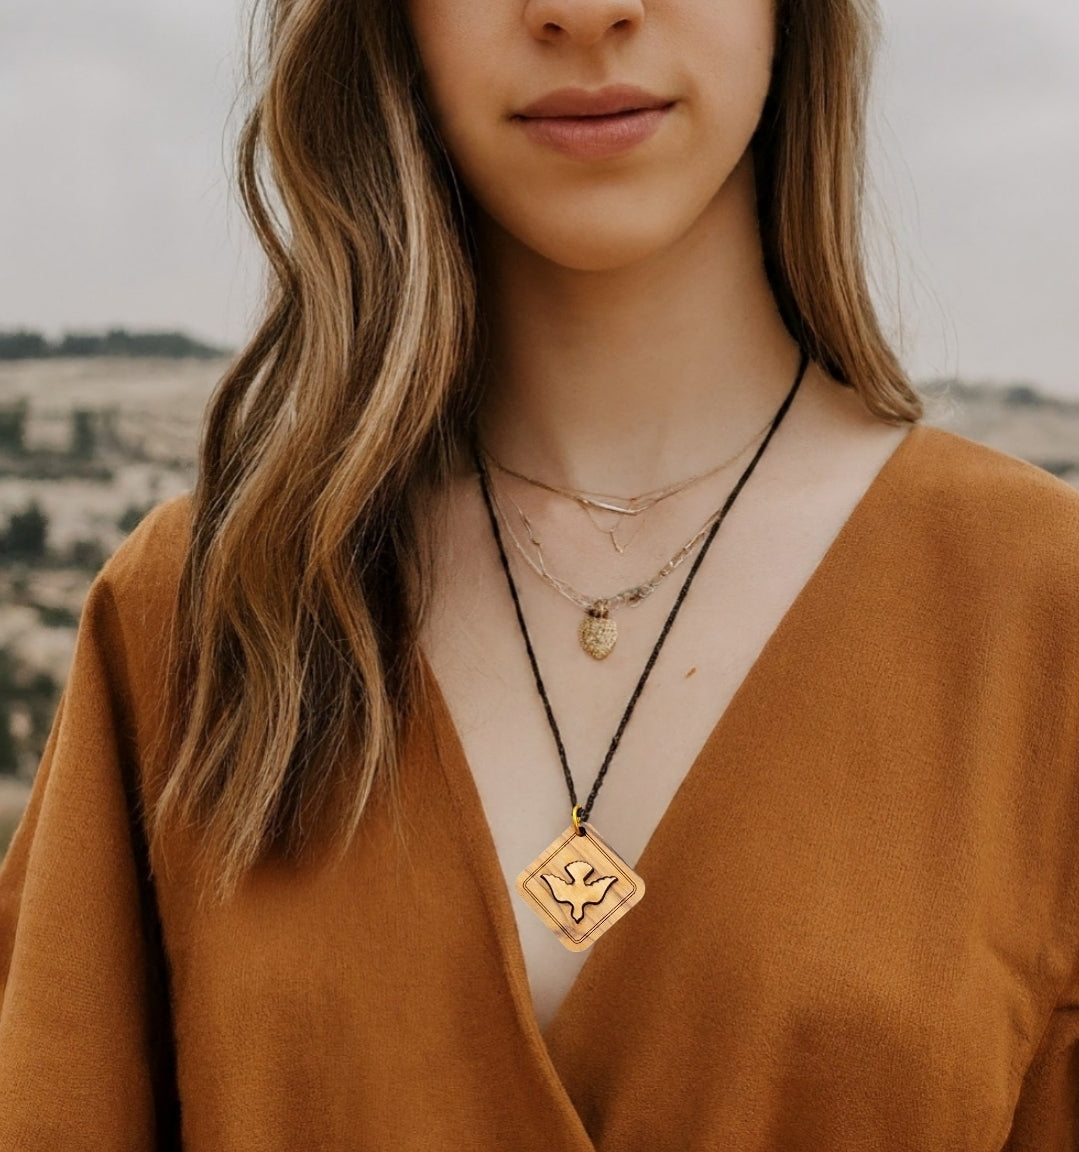 3D Olive wood ‘Holy Spirit Dove’ rhombus shape necklace from the Holy Land.